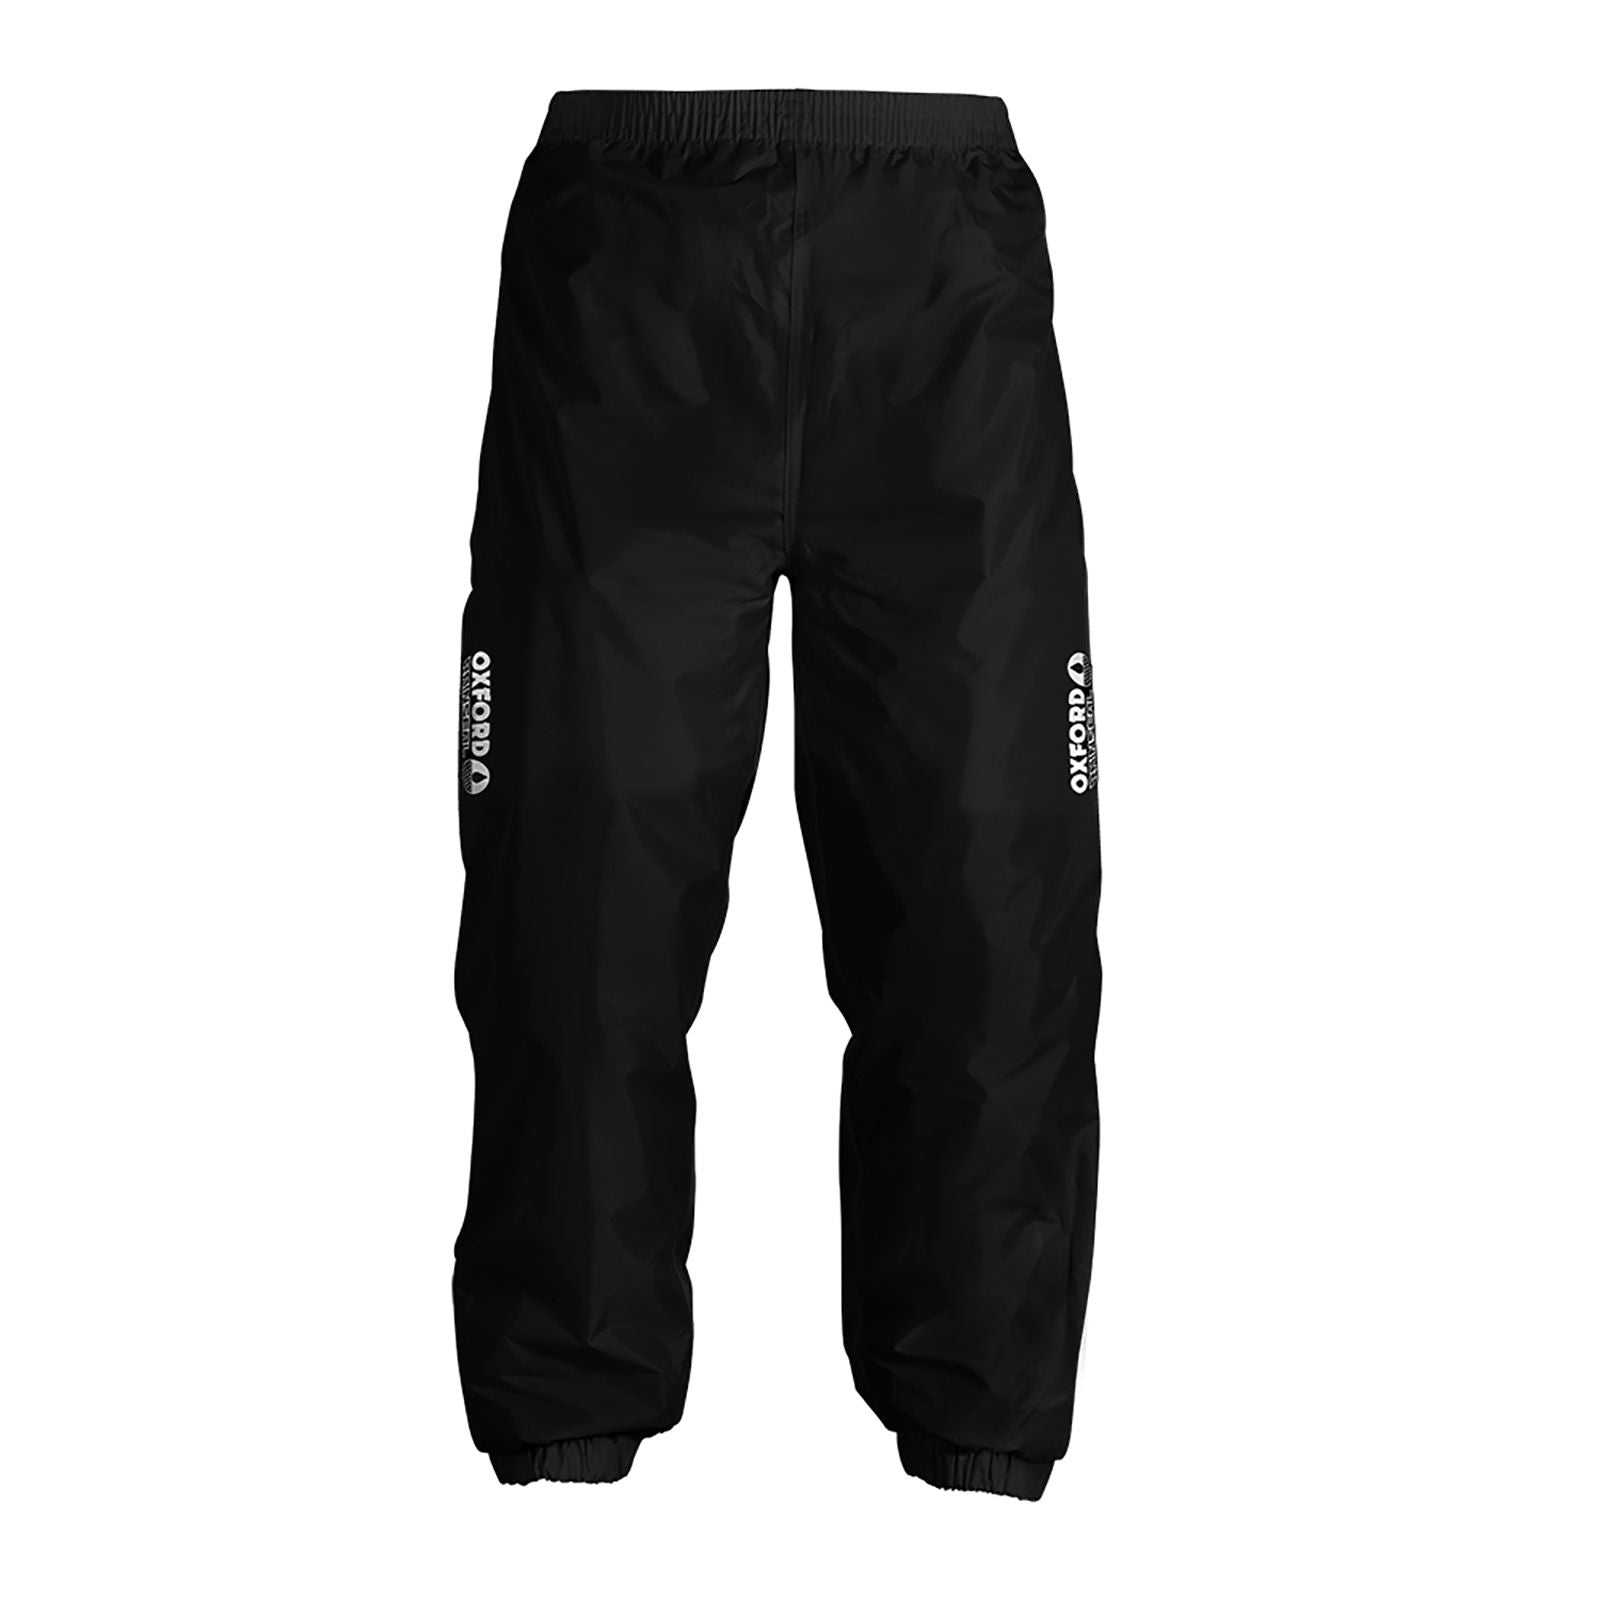 New OXFORD Rainseal Over Trousers - Black - Small #OXRM200S